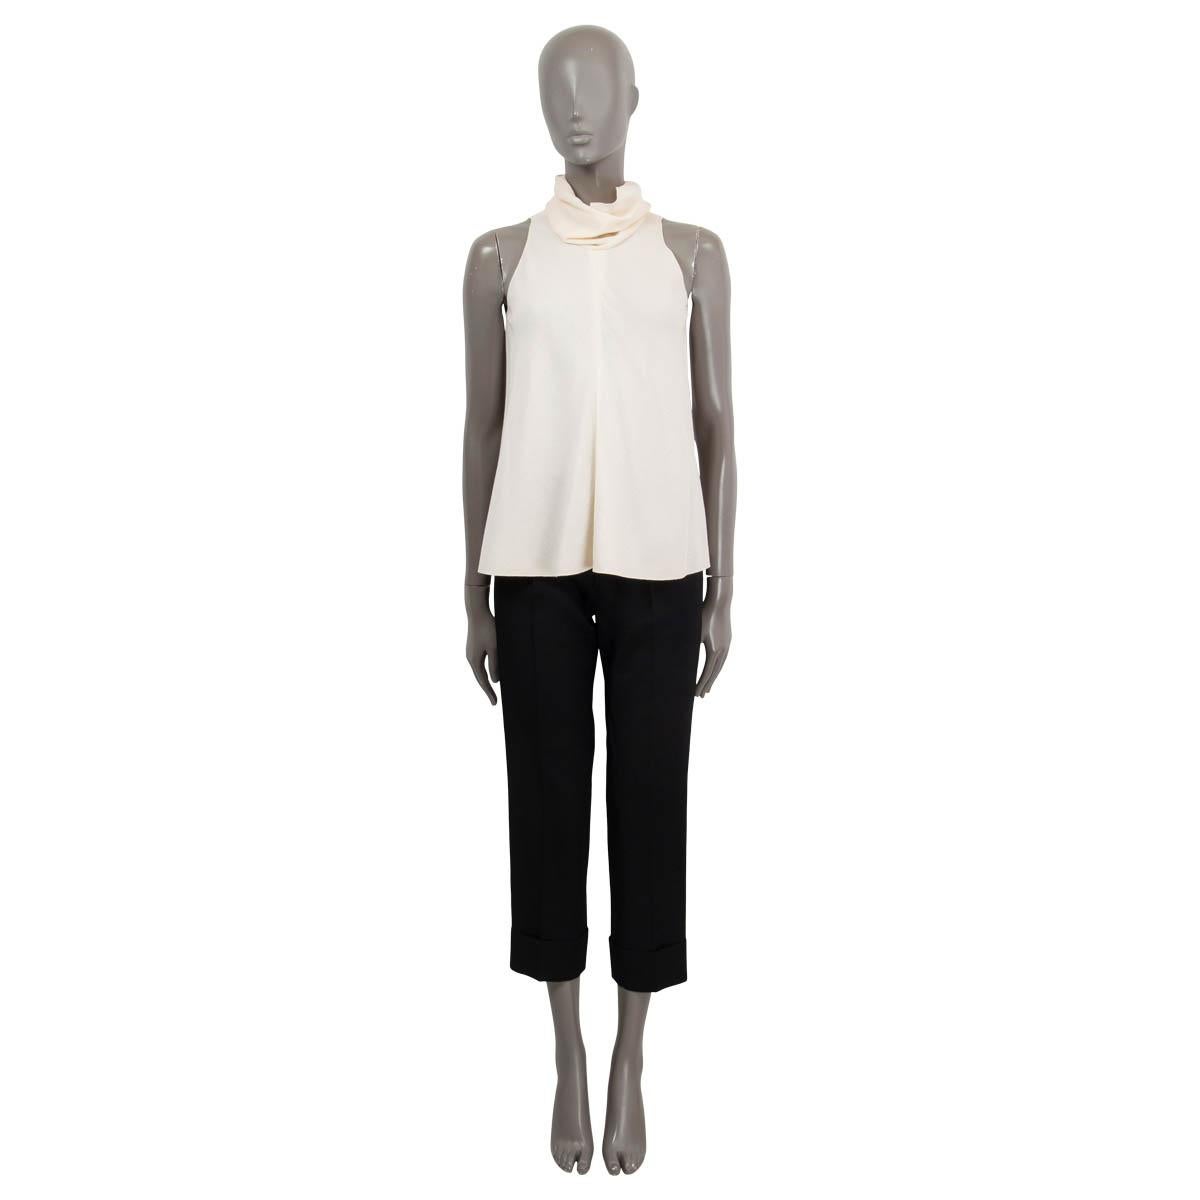 100% authentic Chanel sleeveless turtleneck top in ivory wool (100%). Closes on the back with concealed metal hooks. Unlined. Has been worn and is in excellent condition.

2007 Spring/Summer

Measurements
Model	Chanel07P
Tag Size	36
Size	XS
Bust